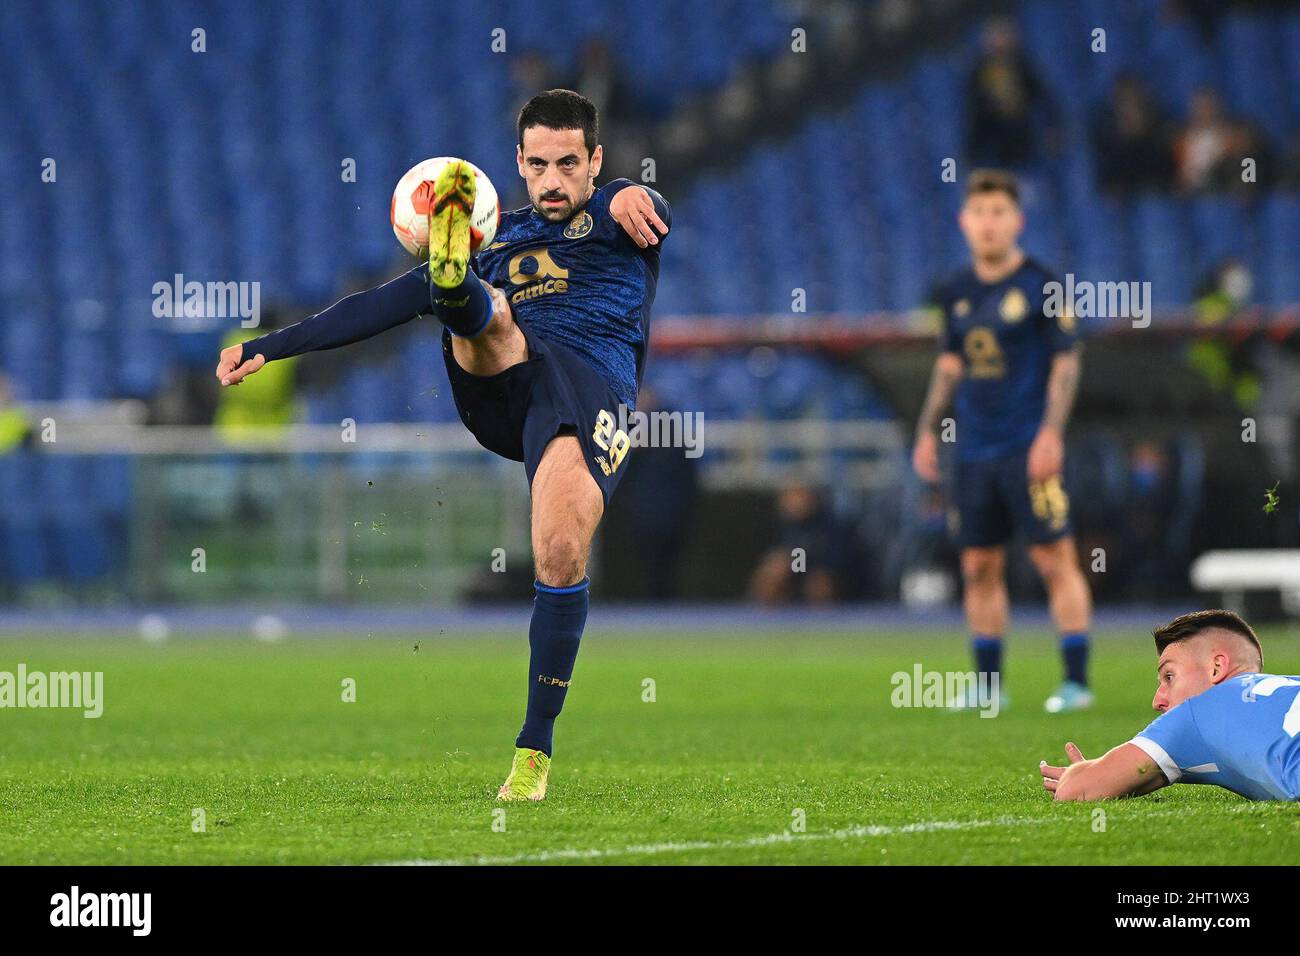 Rome, Italy. 24th Feb, 2022. Bruno Costa of F.C. Porto in action during the Knockout Round Play-Offs Leg Two - UEFA Europa League between SS Lazio and FC Porto at Stadio Olimpico on 24th of February, 2022 in Rome, Italy. (Photo by Domenico Cippitelli/Pacific Press) Credit: Pacific Press Media Production Corp./Alamy Live News Stock Photo